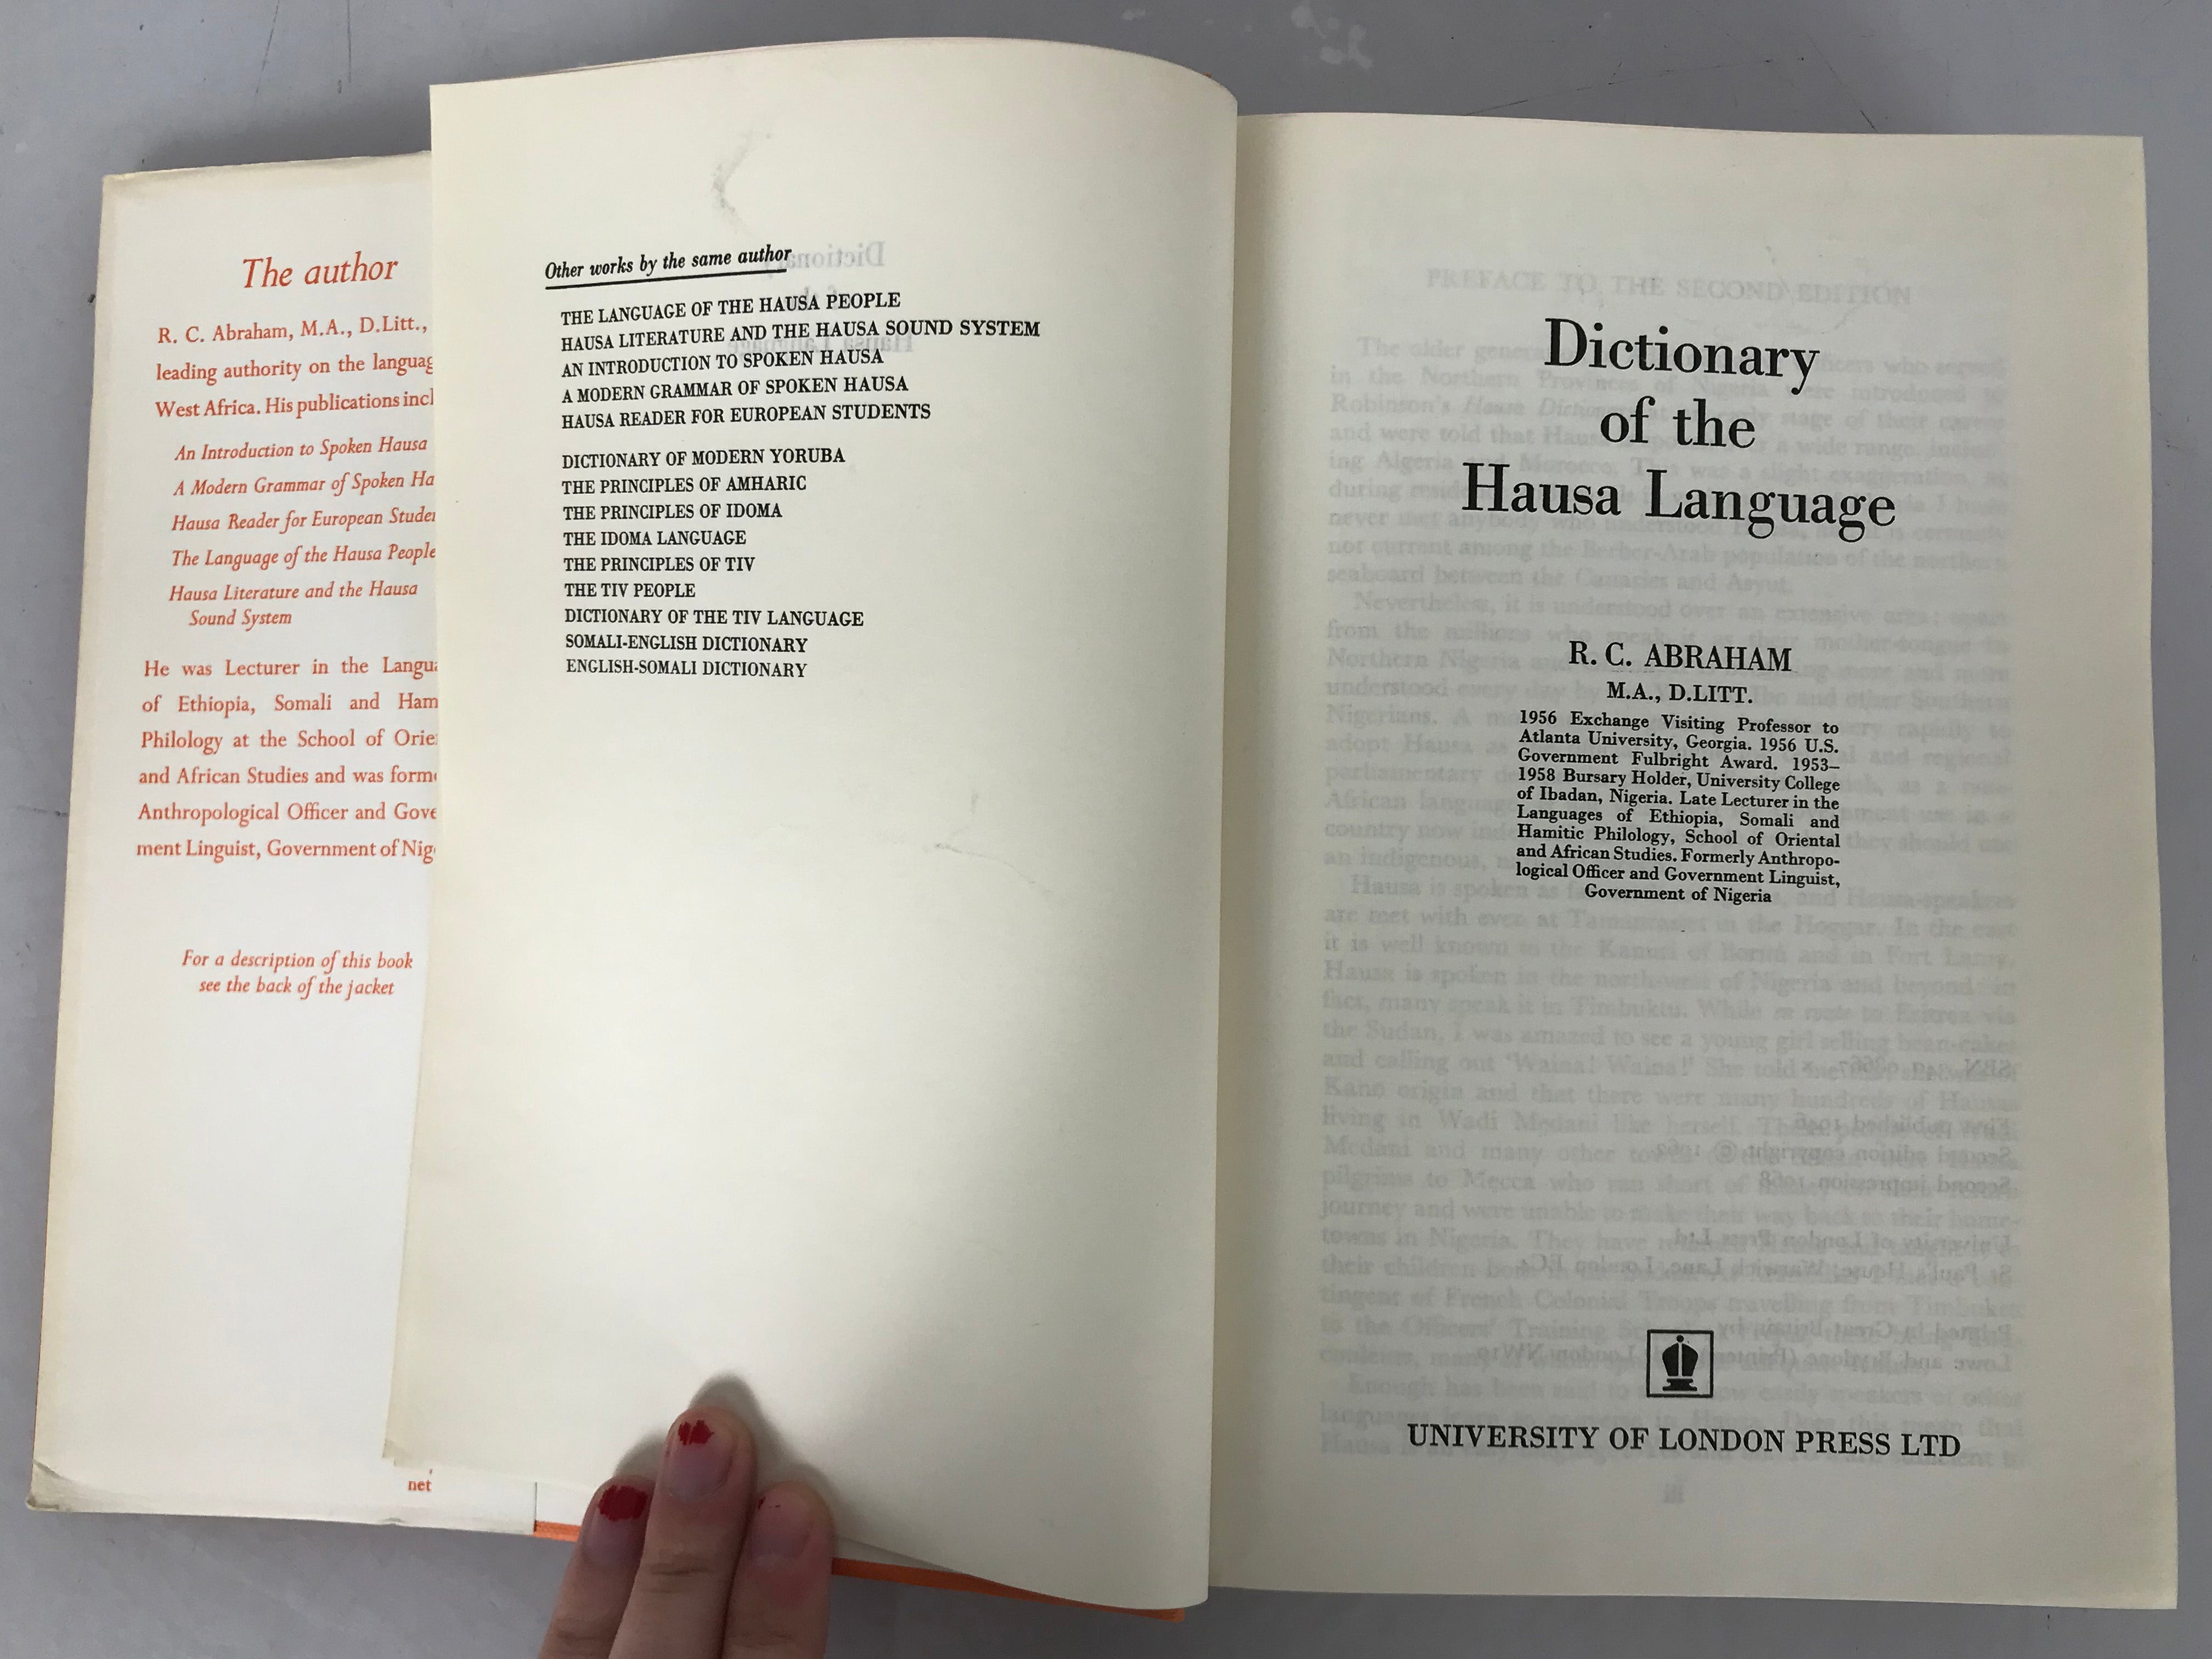 Dictionary of the Hausa Language by R.C. Abraham 1968